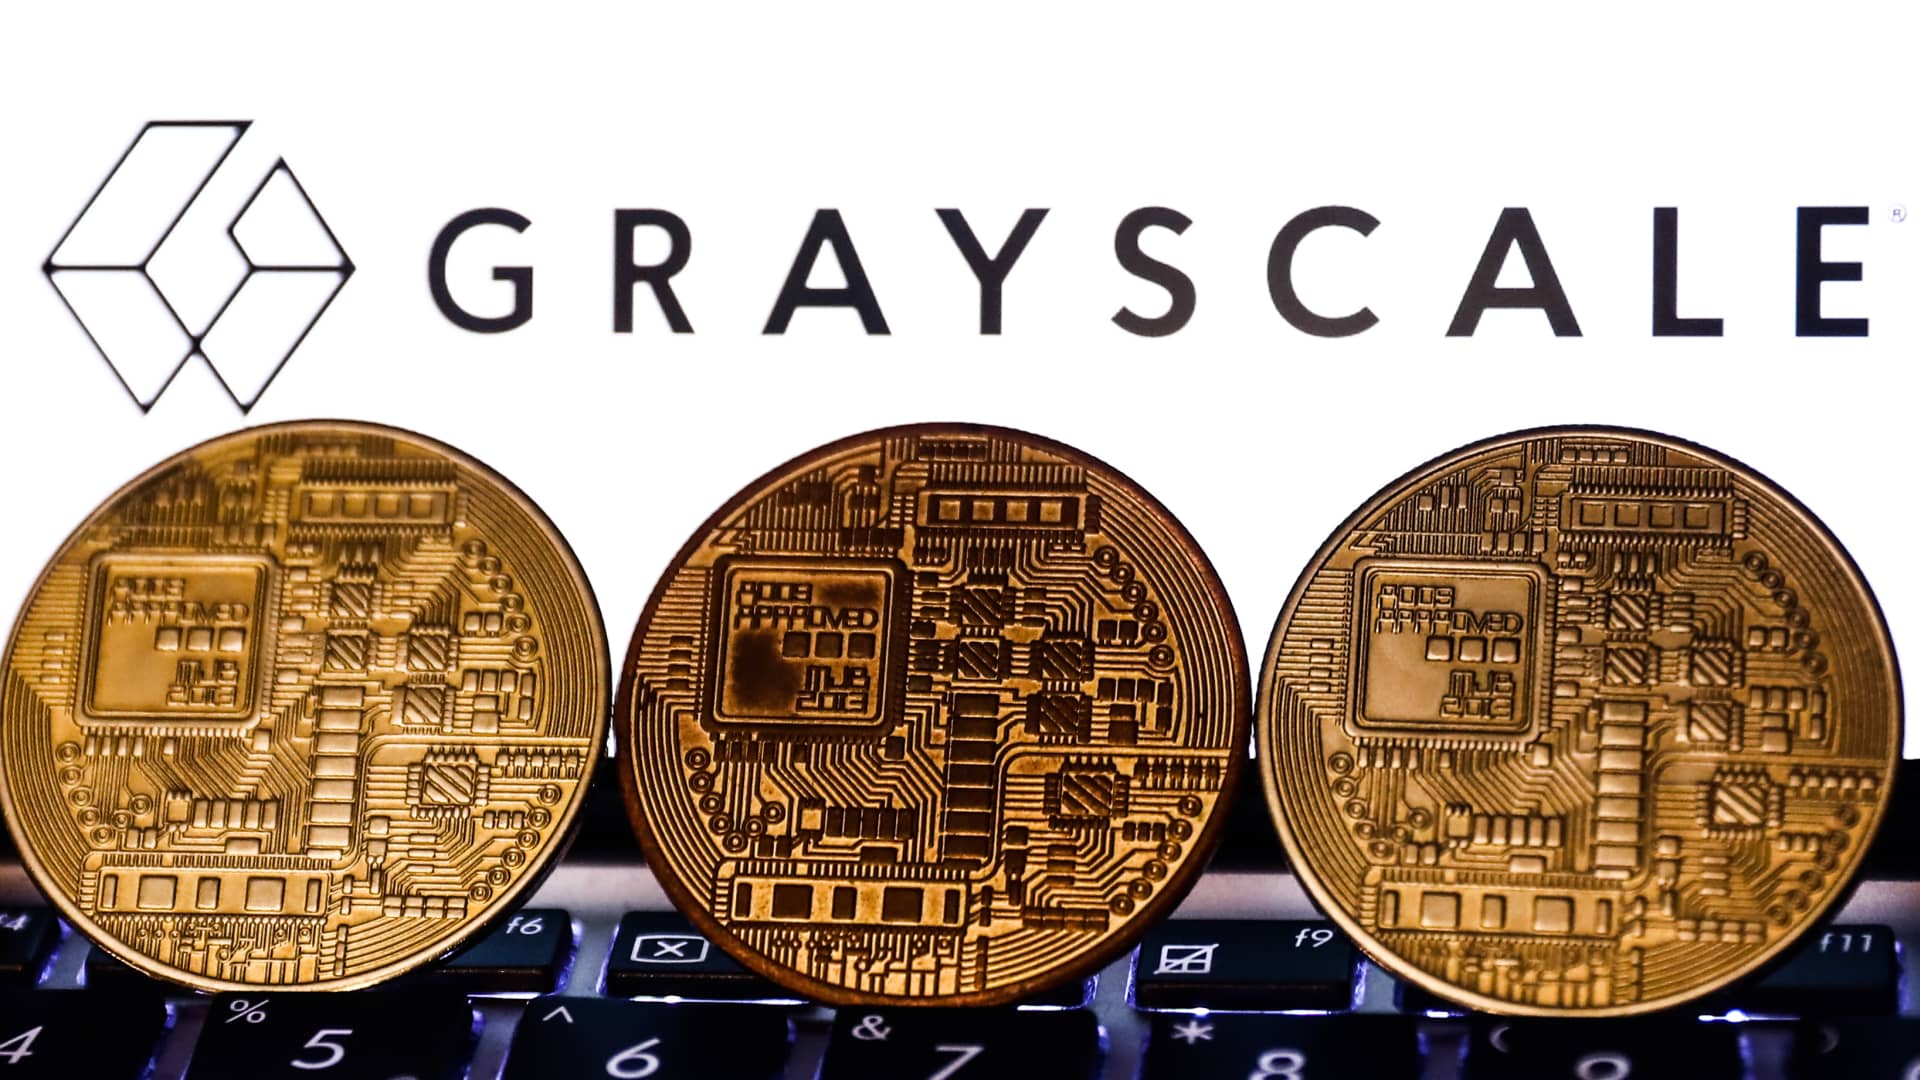 Grayscale refuses to share proof of reserves due to 'security concerns' as shares trade at a 45% discount to bitcoin - CNBC (Picture 1)